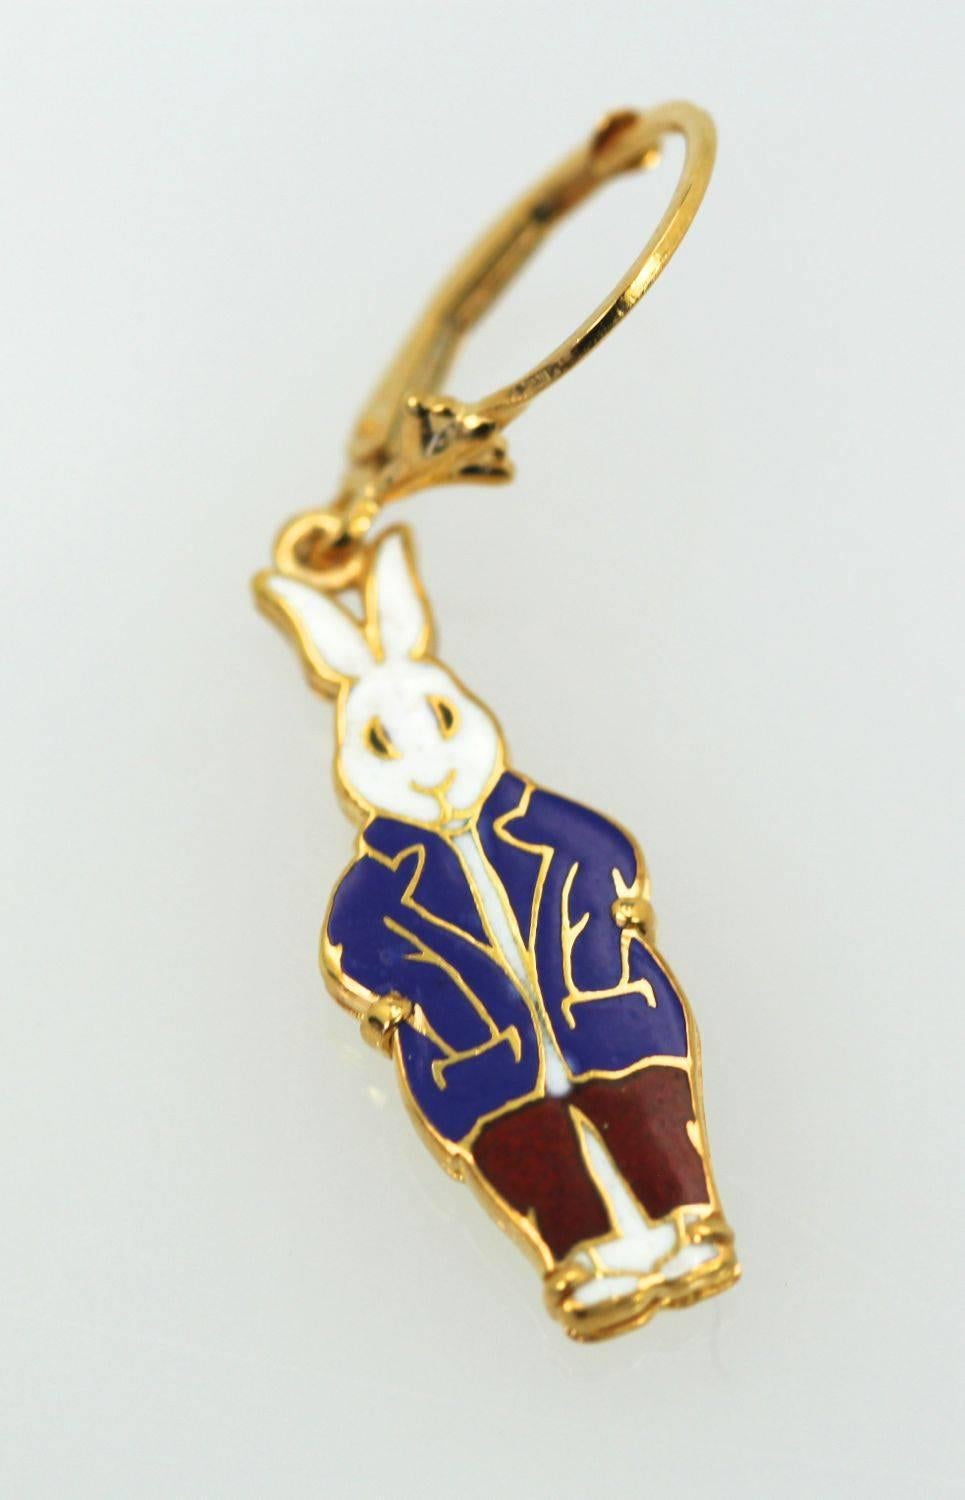 Charming Peter Rabbit 14 Karat Enamel Earrings In Good Condition For Sale In North Hollywood, CA